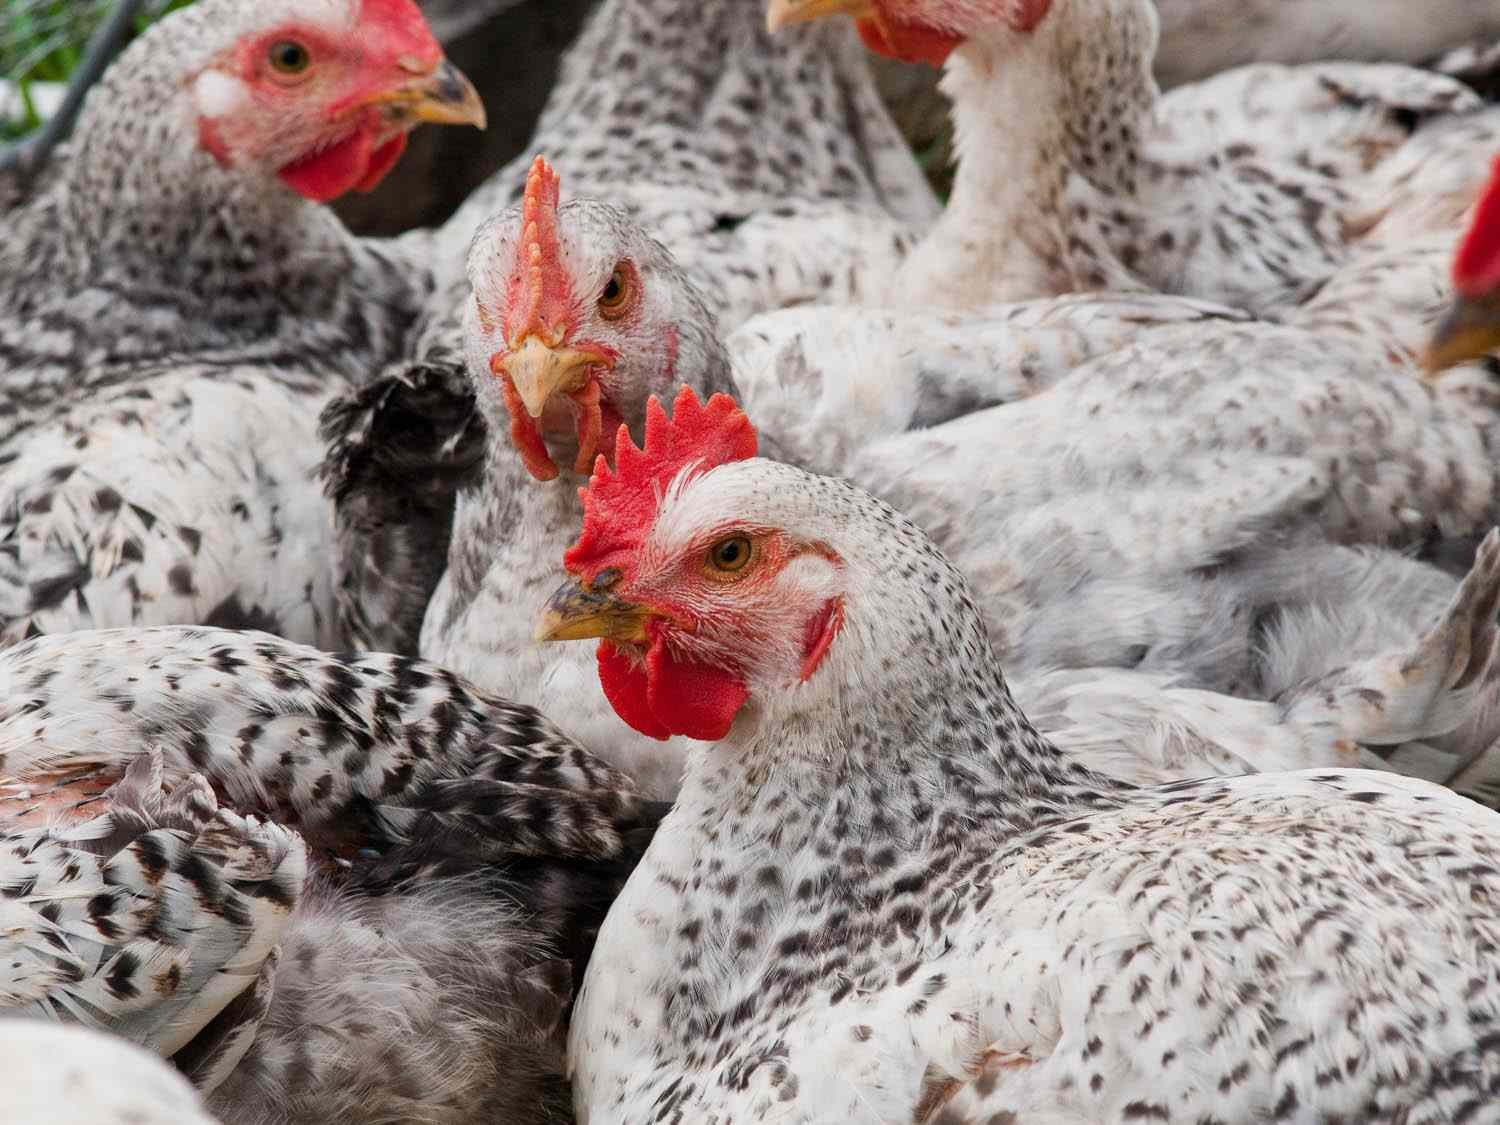 Know Your Chicken: What USDA Poultry Labels Actually Mean